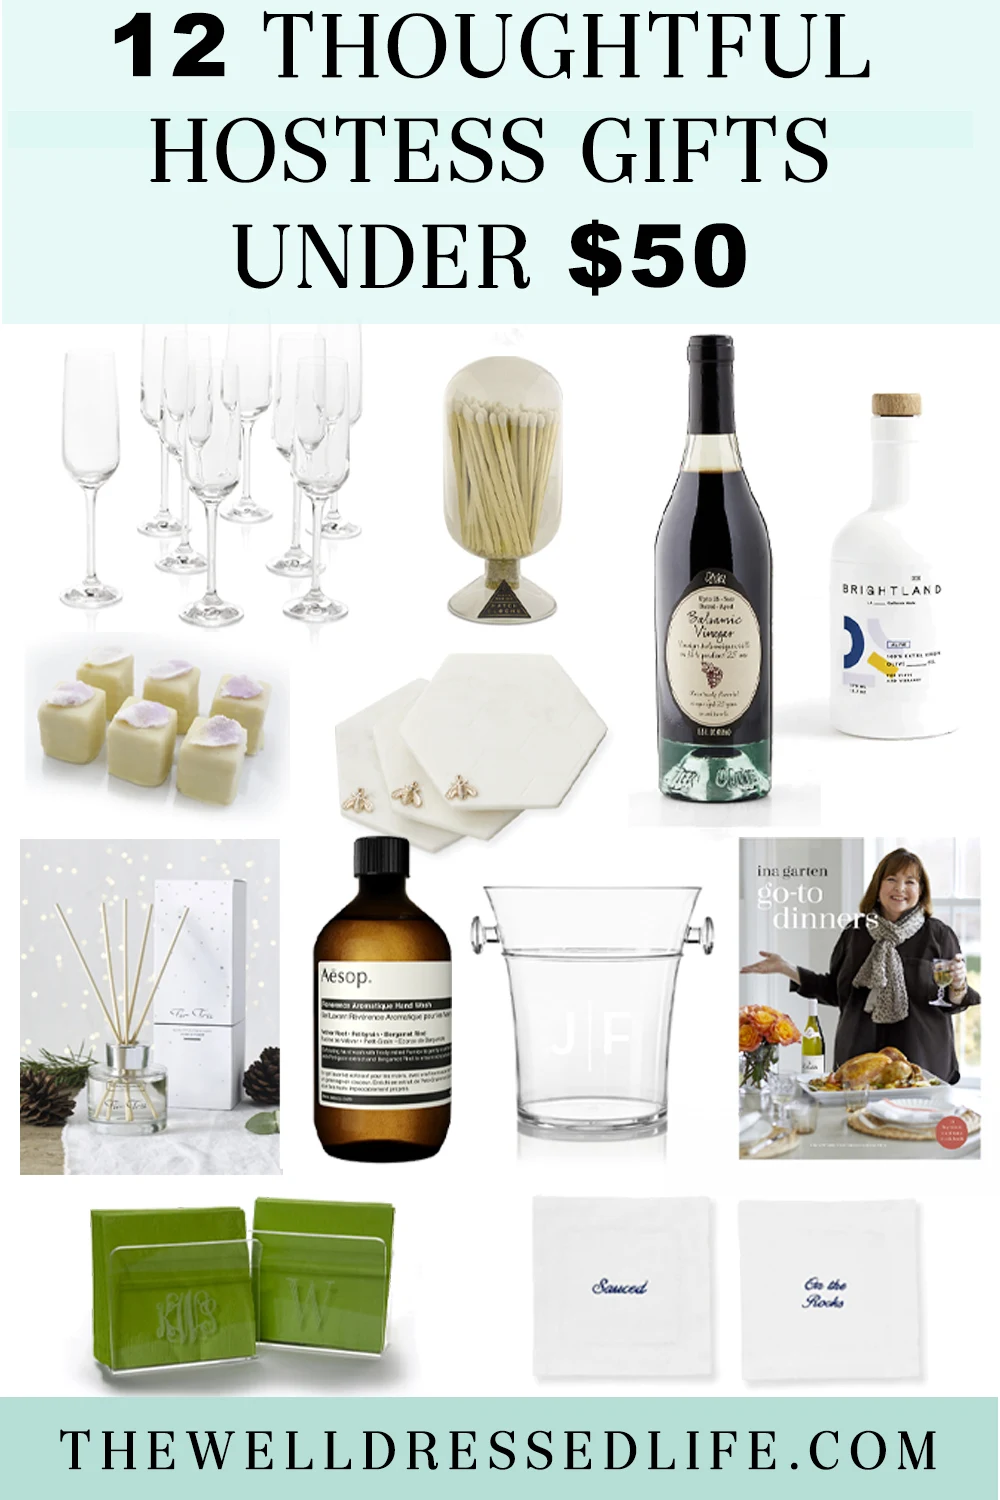 12 Thoughtful Hostess Gifts Under $50